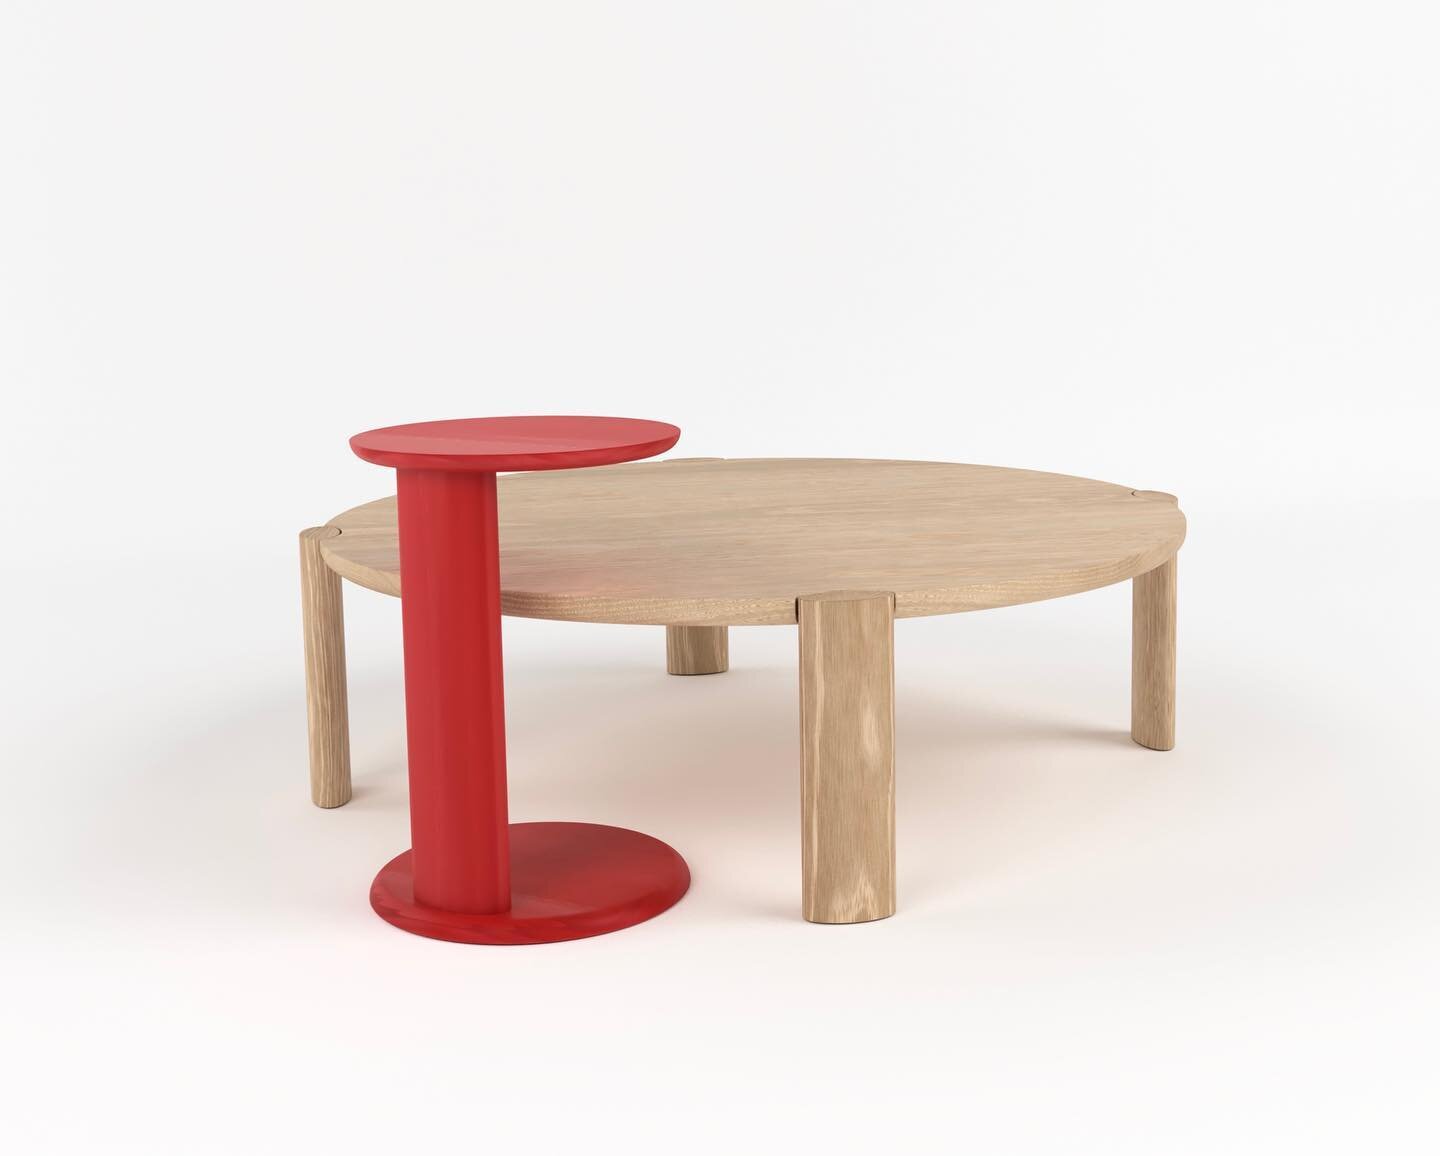 Lepel Coffee Table in Oak with our Soba Side Table in red pigmented lacquer. Designed by @nickrenniehfd and made to order in our Alphington workshop.